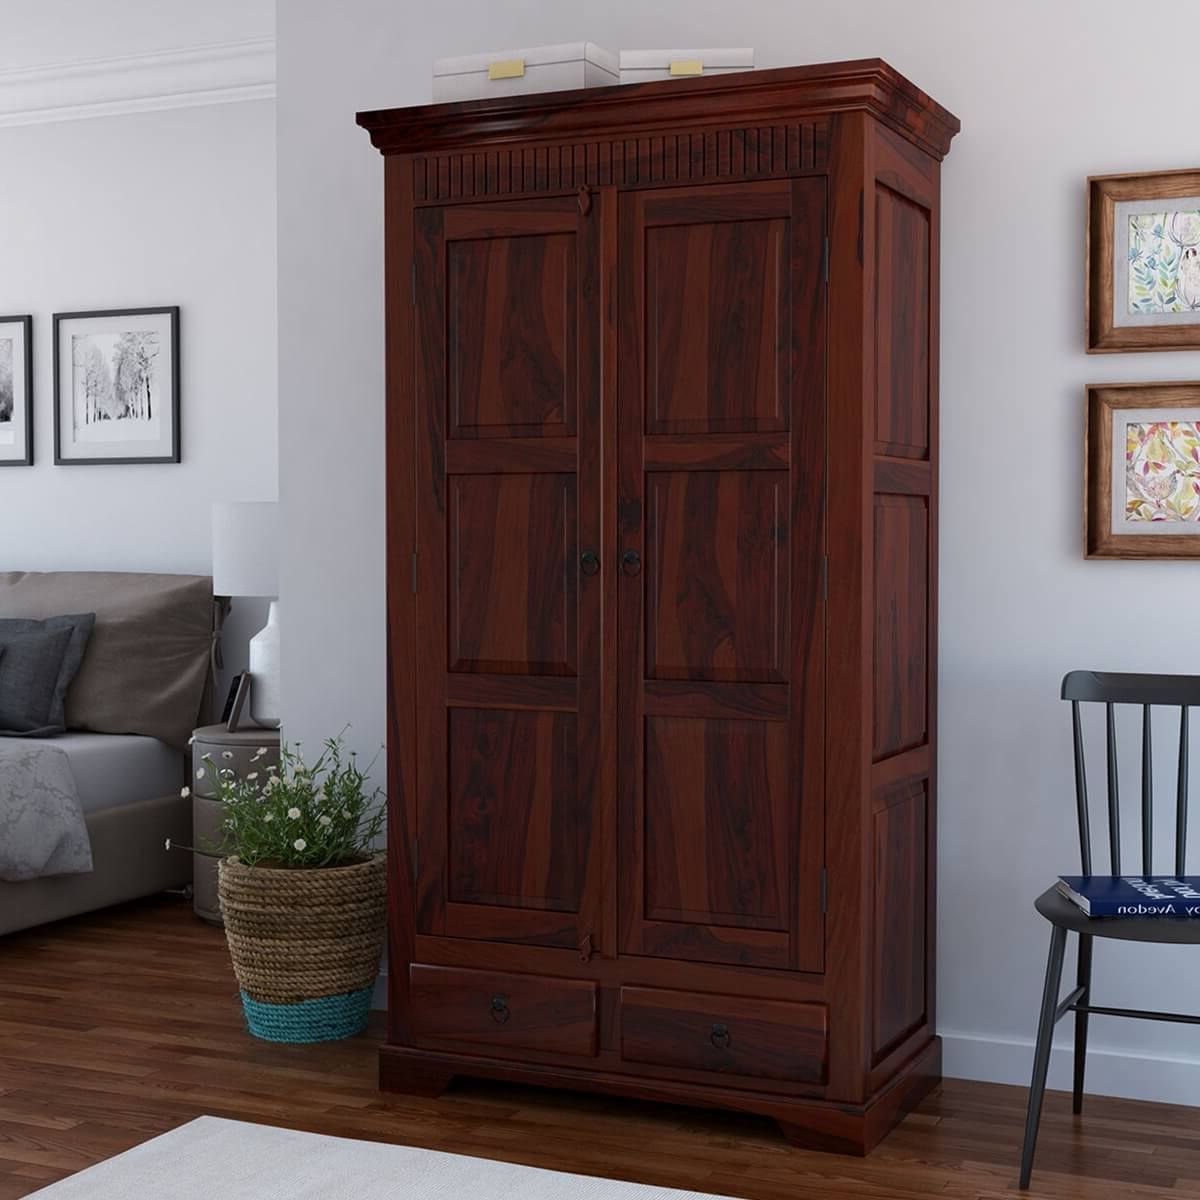 Marengo Rustic Solid Wood Large Wardrobe Armoire W Shelves And Drawers Intended For Large Wooden Wardrobes (Gallery 16 of 20)